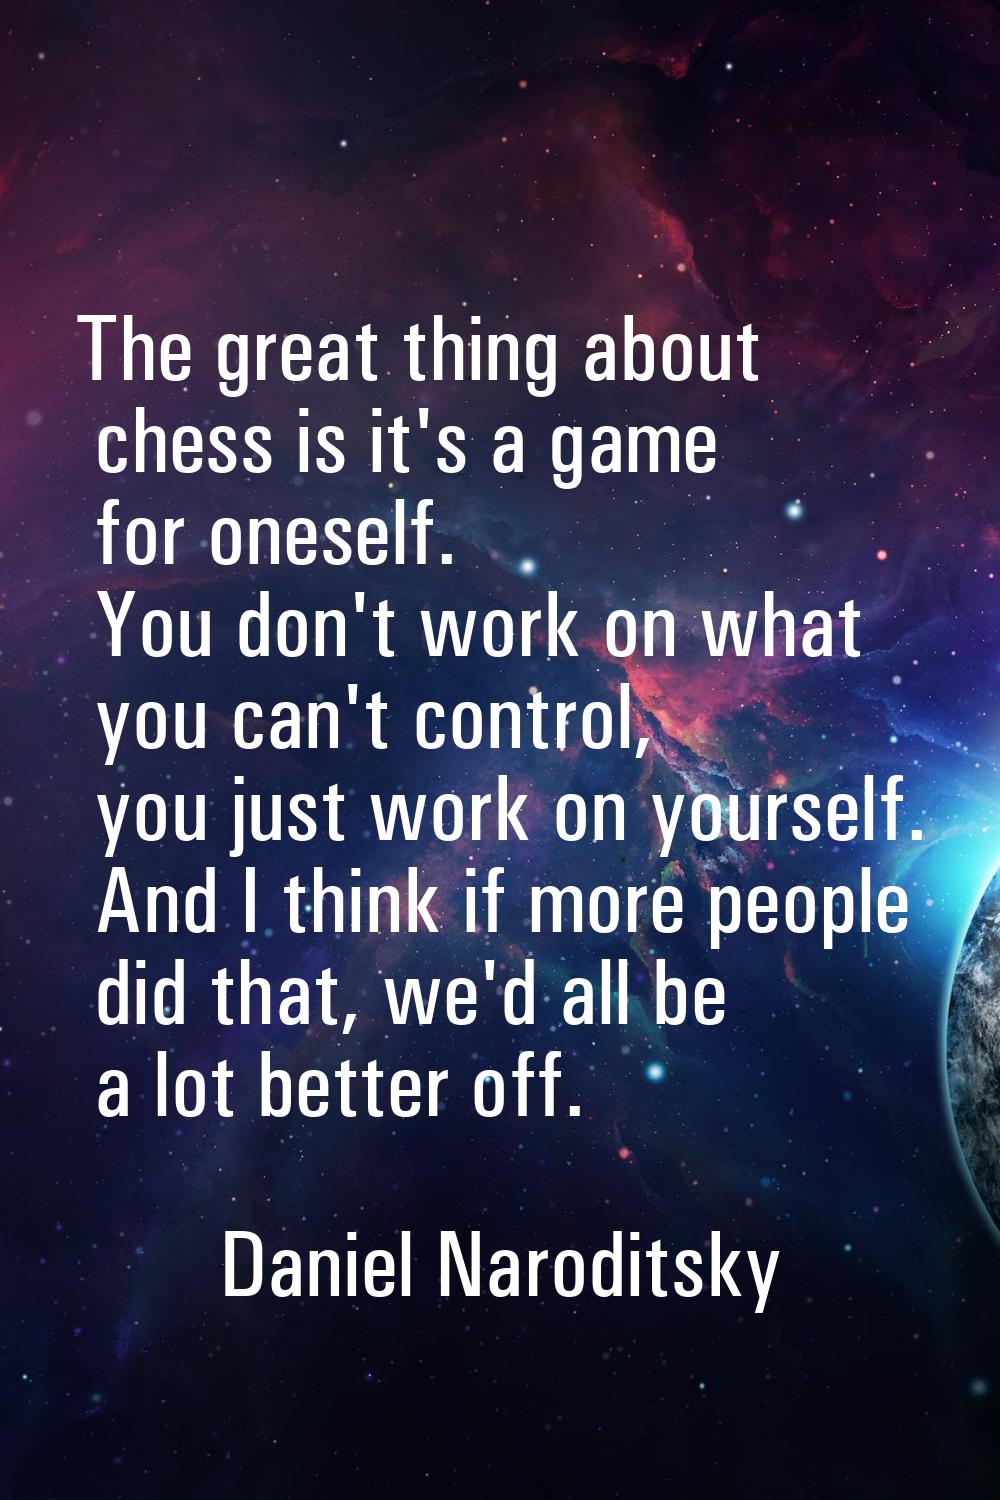 The great thing about chess is it's a game for oneself. You don't work on what you can't control, y